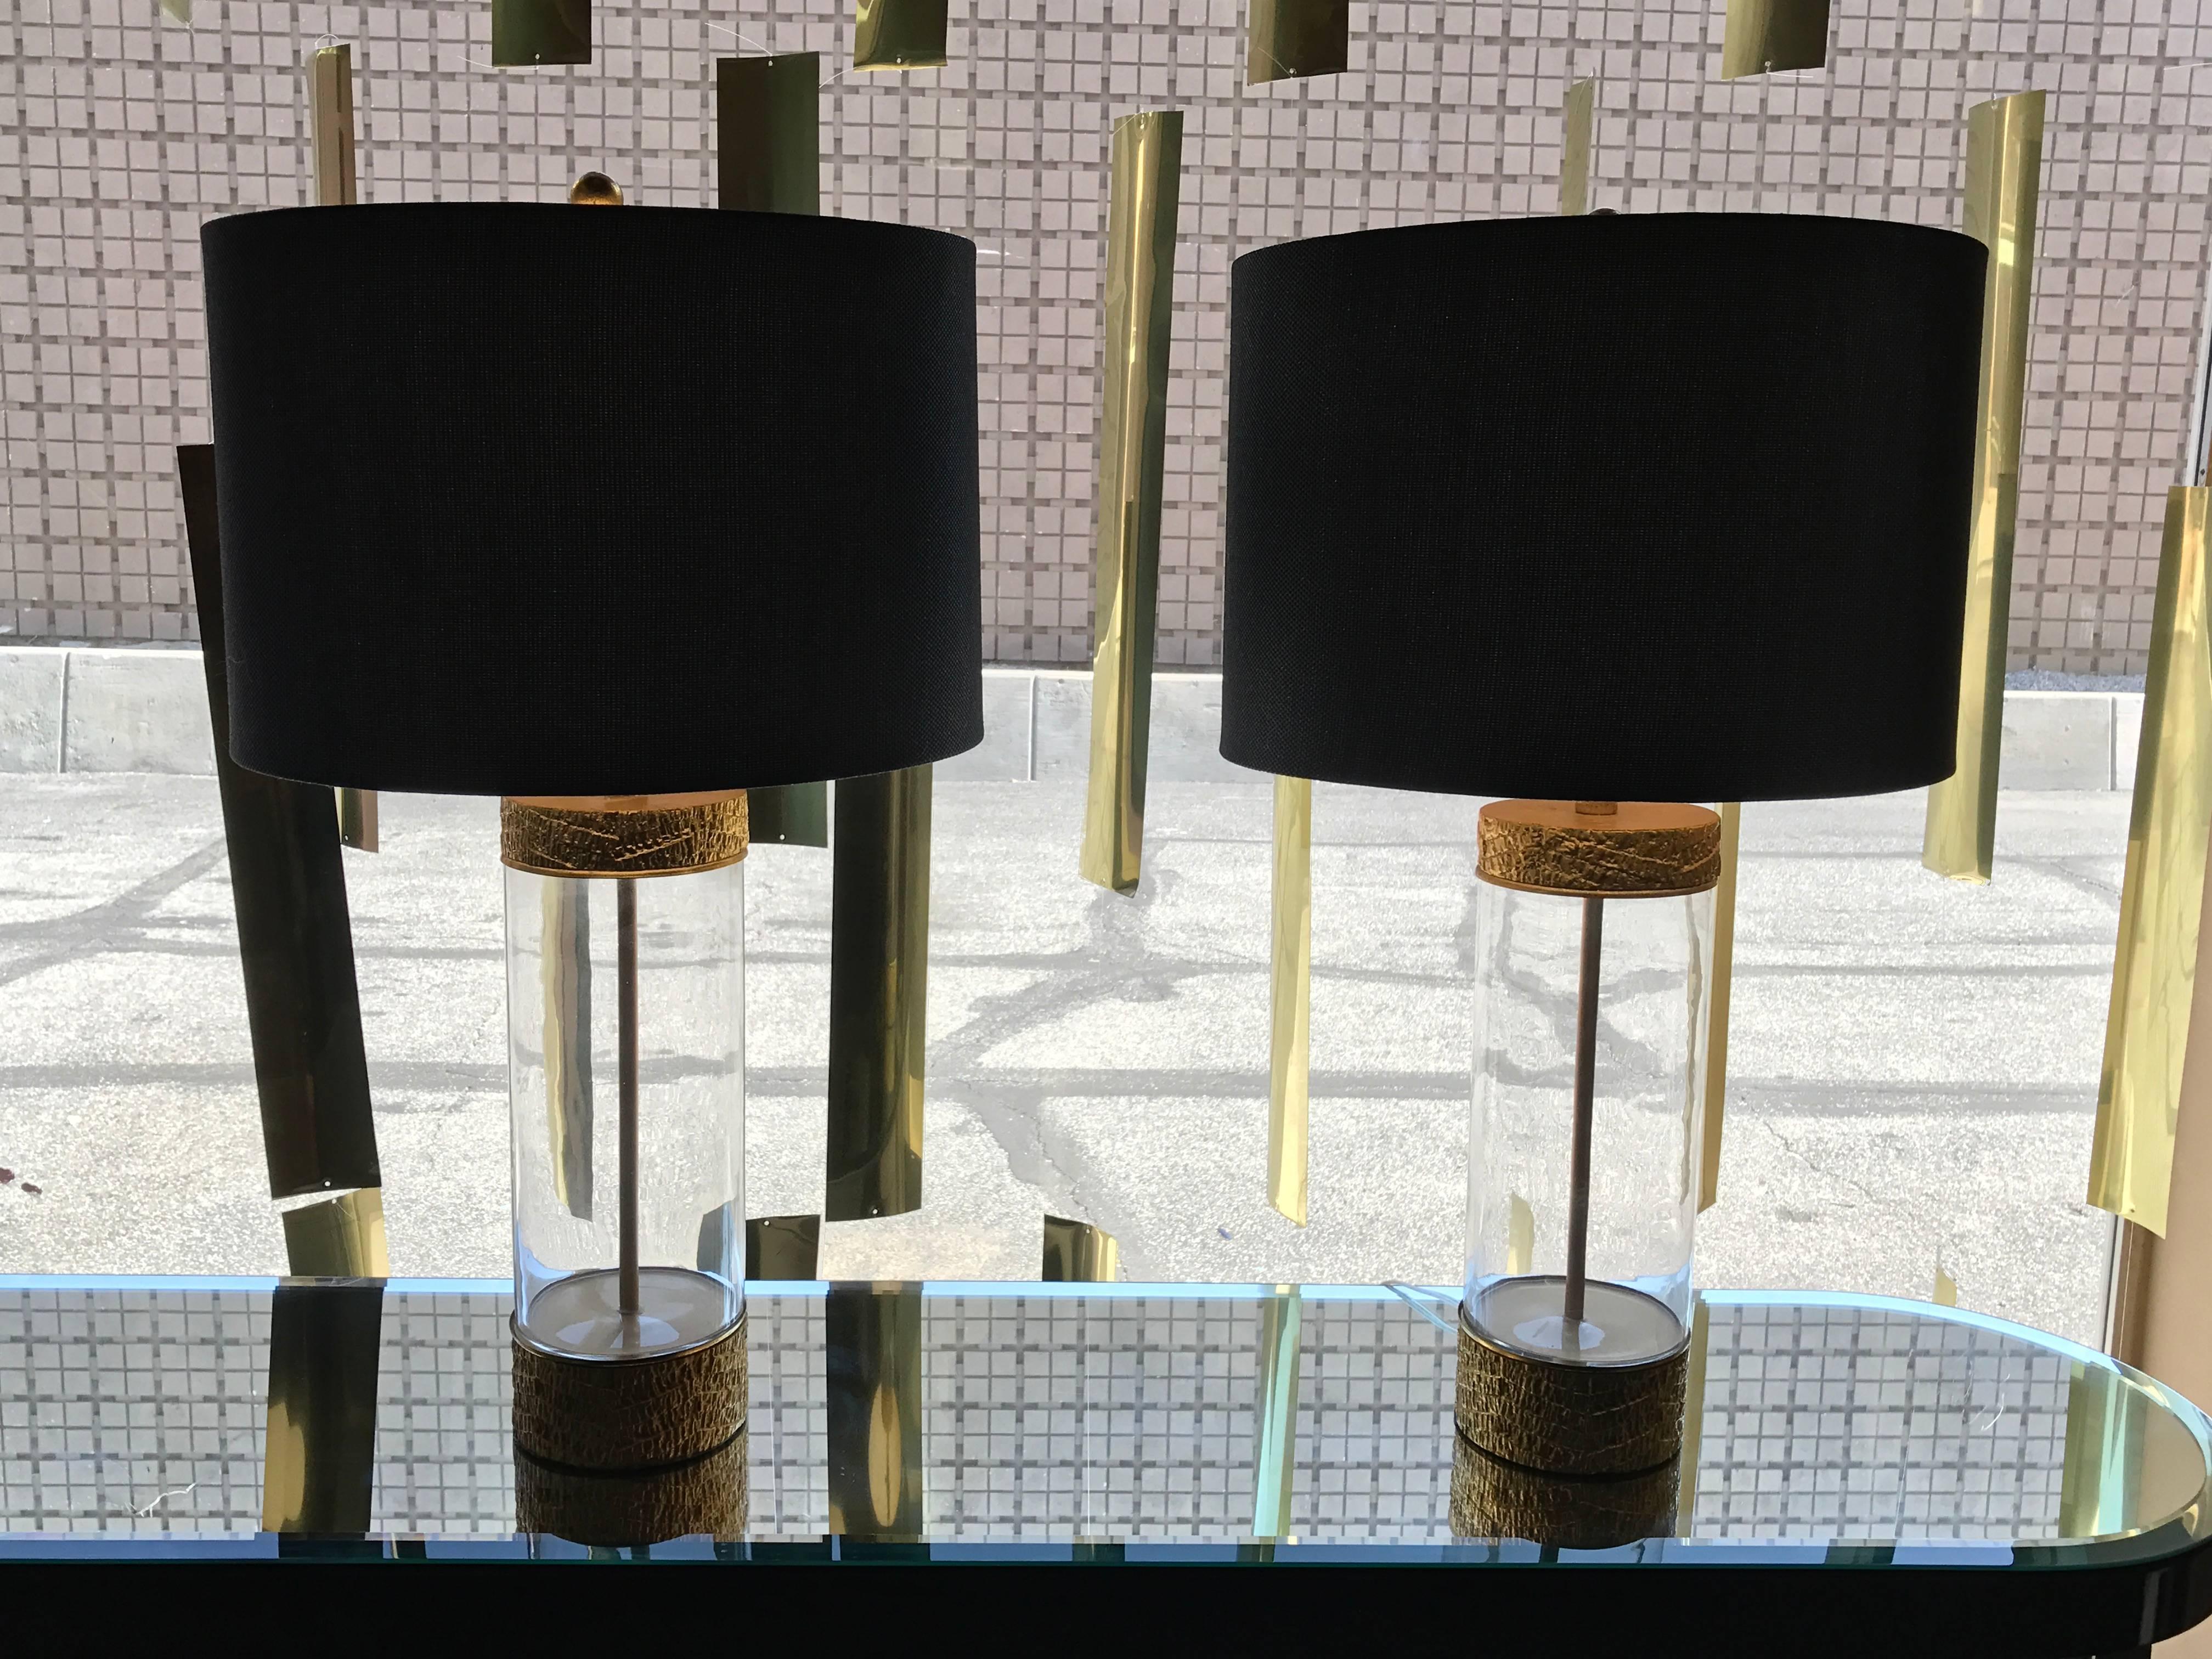 20th Century Pair of Very Chic Gold, Glass, Modern Table Lamps in the Style of Steve Chase